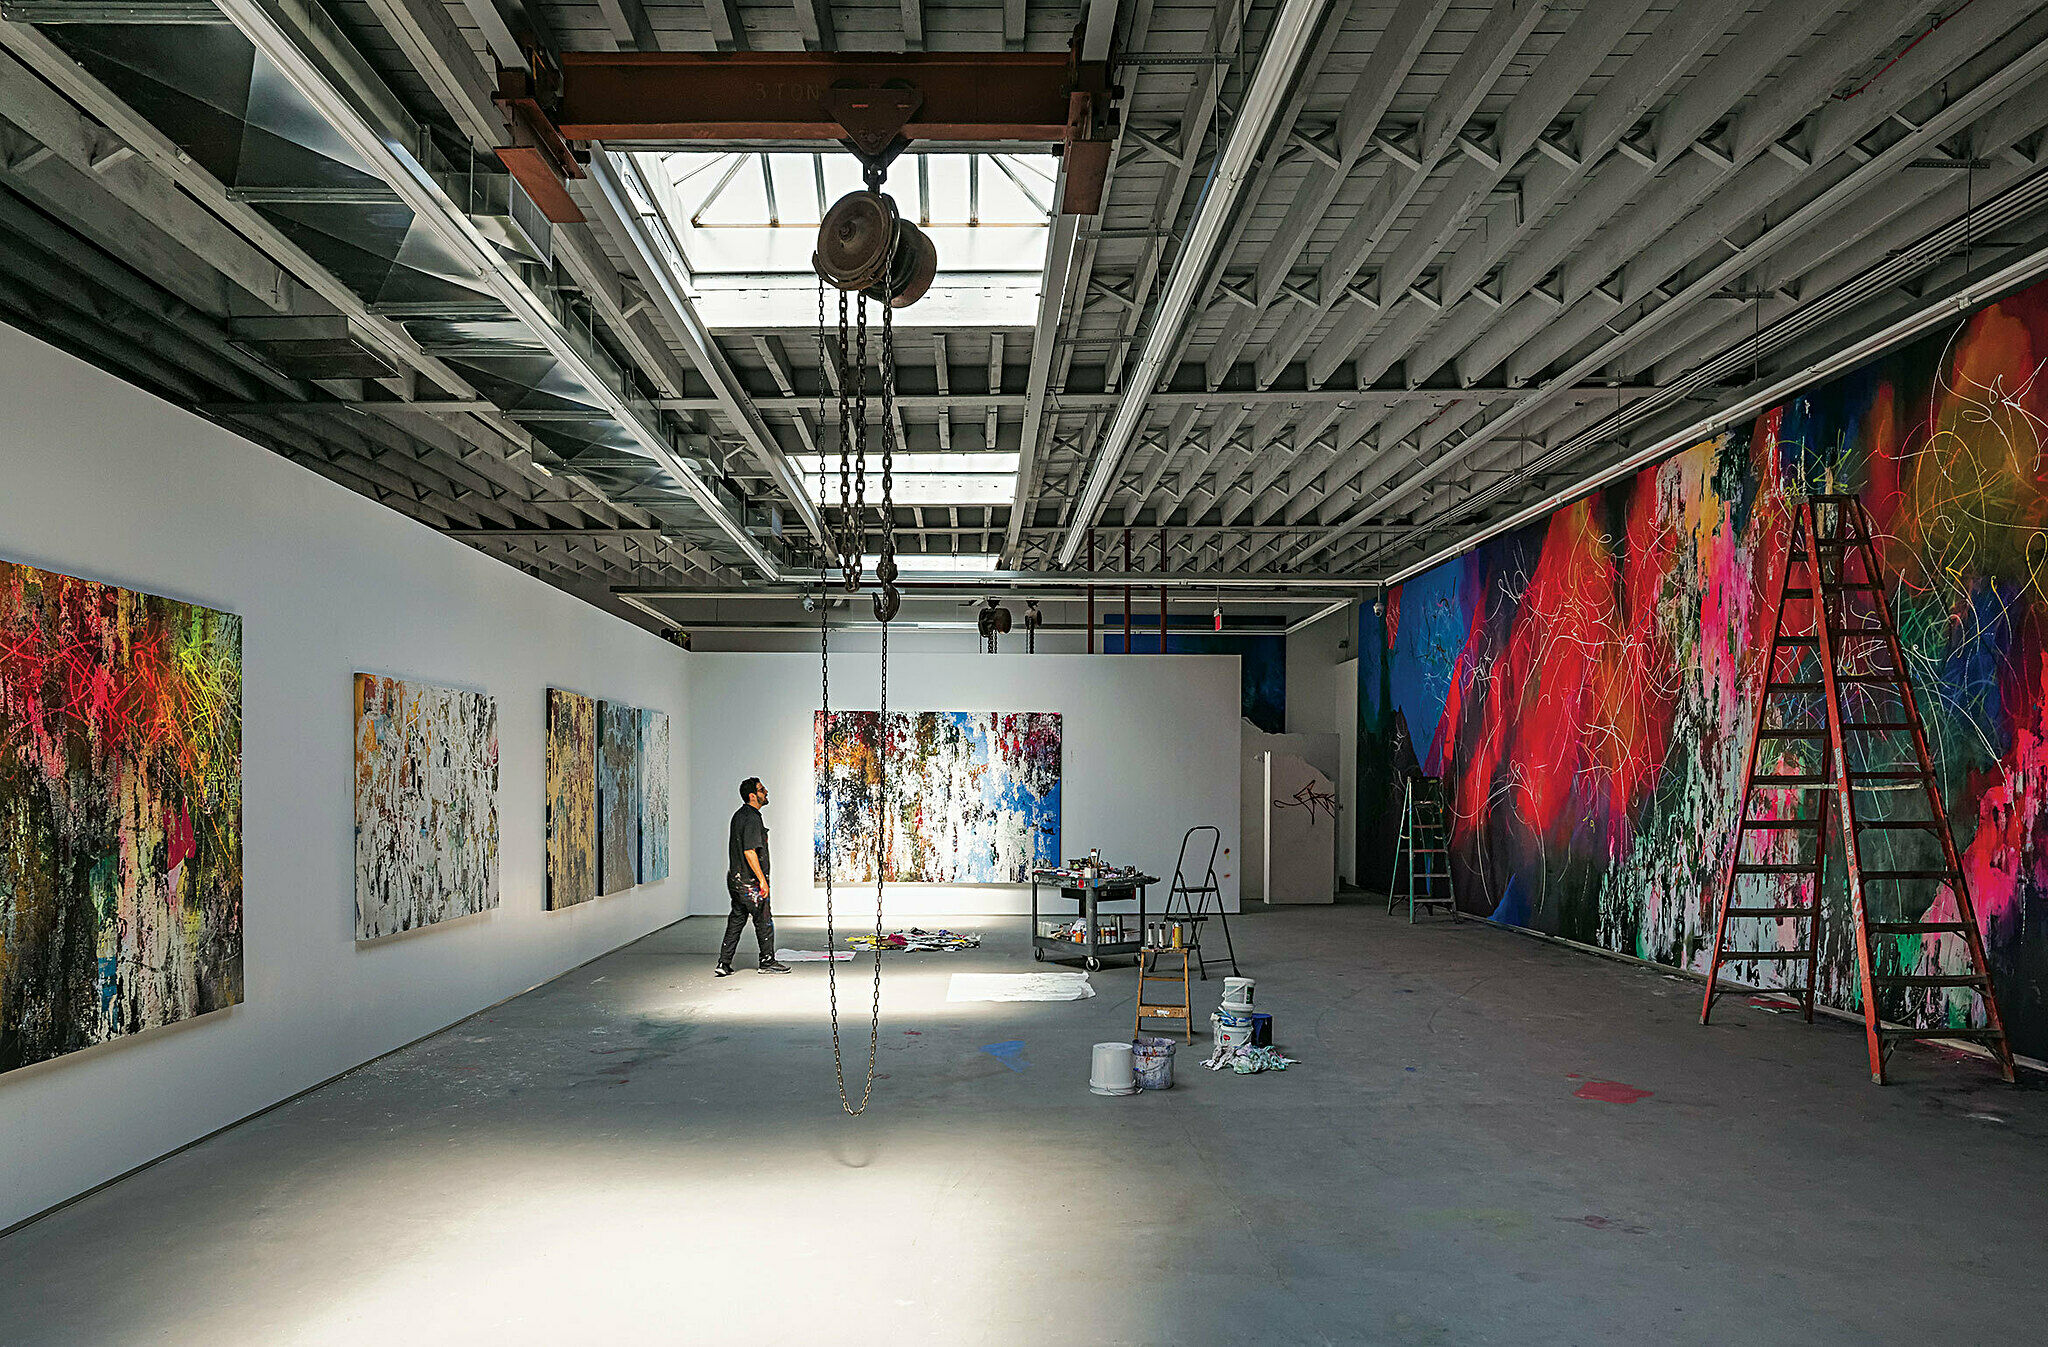 Large industrial studio with bright paintings on wall